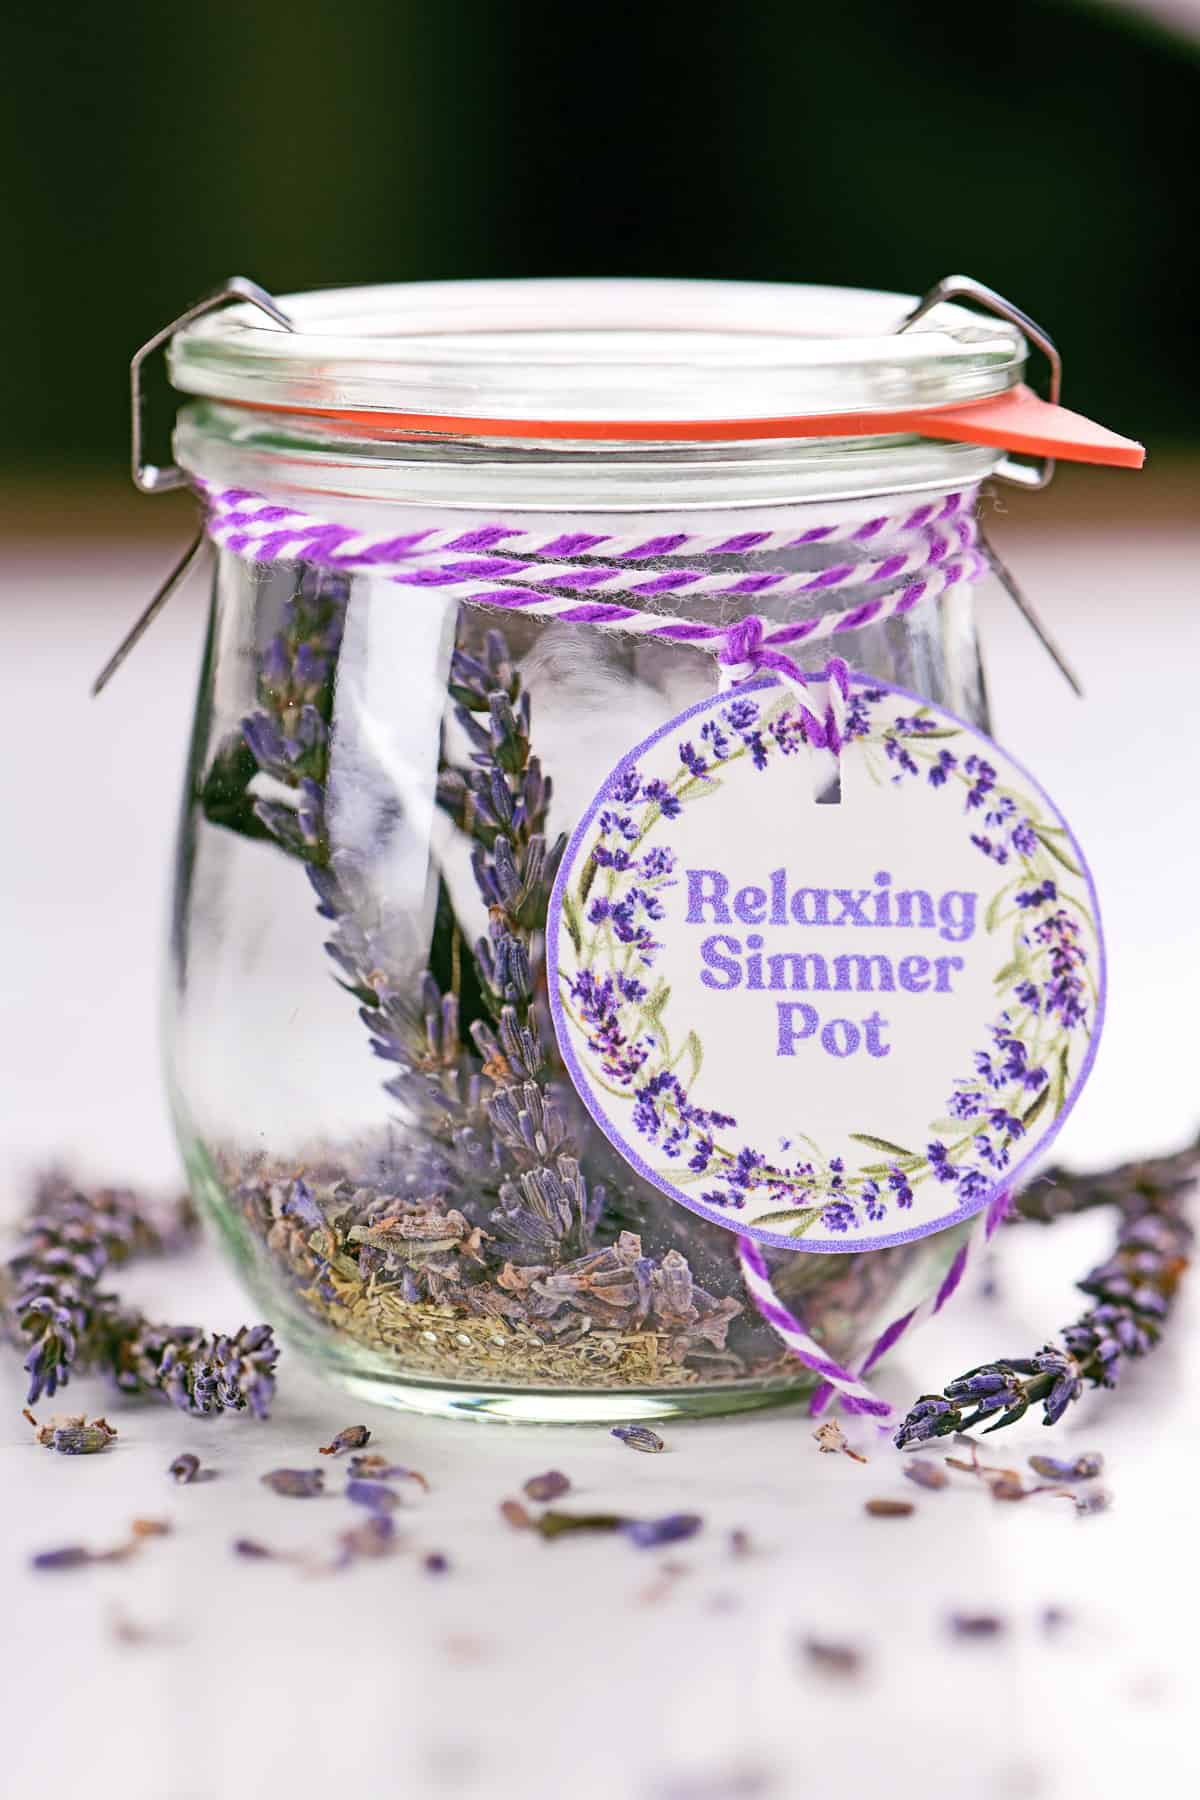 A jar with Relaxing simmering pot ingredients inside.